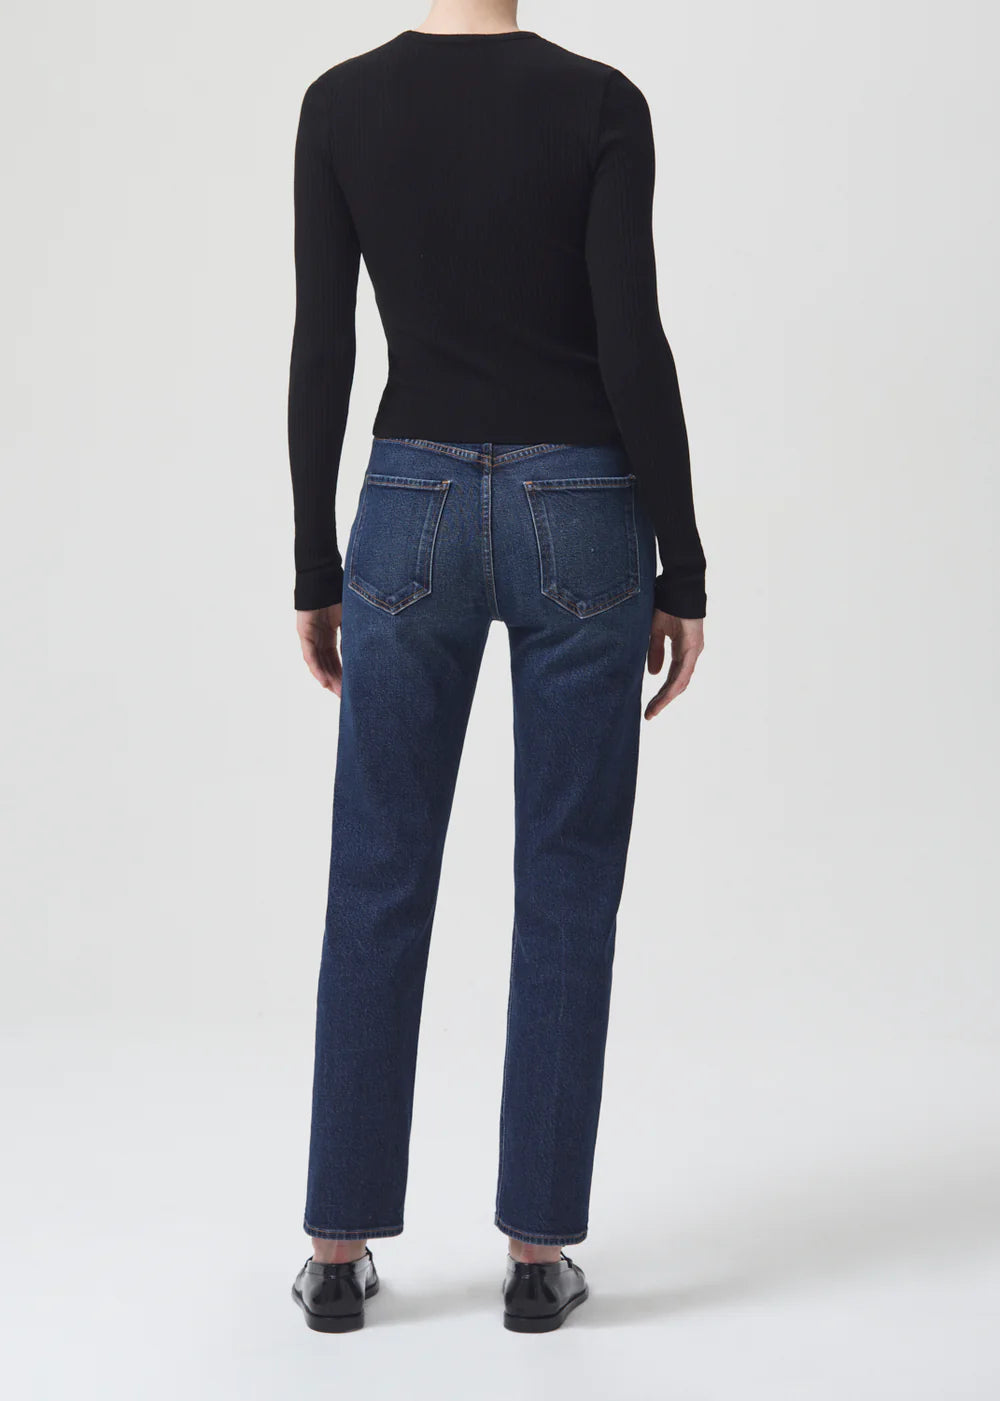 The back view of a woman wearing AGOLDE Riley Straight Long - Divided jeans, a black sweater.